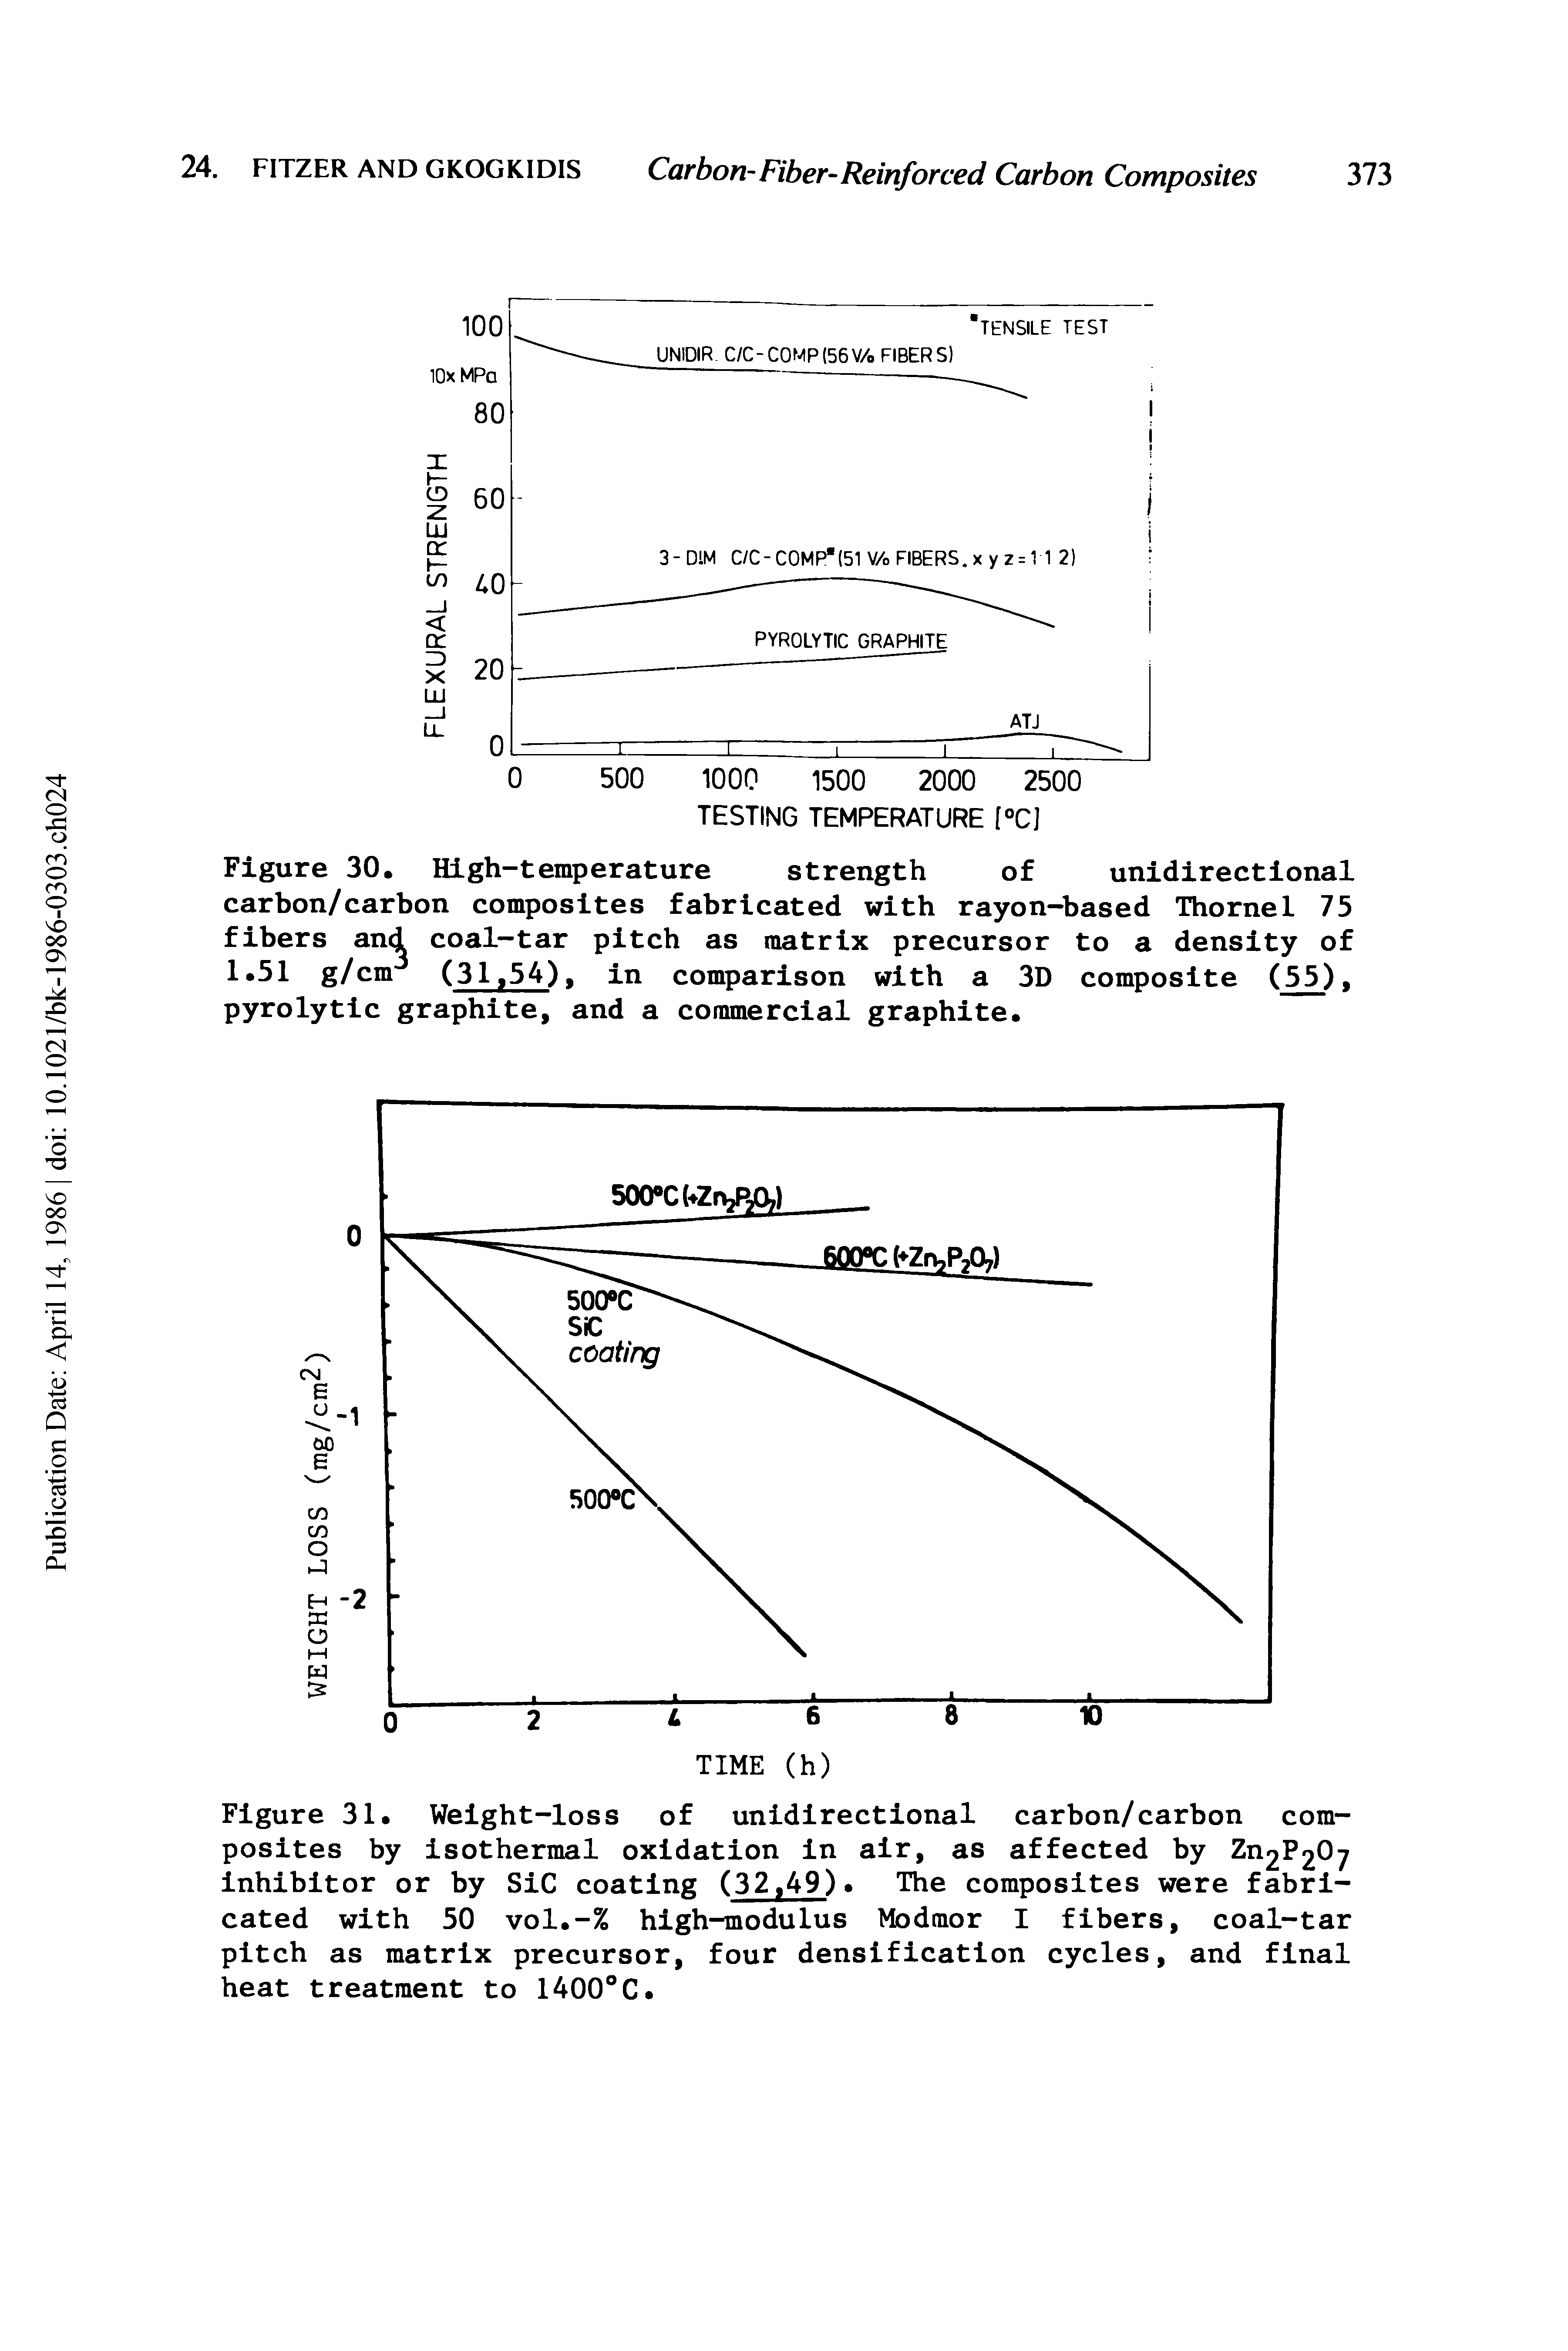 Figure 31. Weight-loss of unidirectional carbon/carbon composites by isothermal oxidation in air, as affected by Zn2 207 inhibitor or by SiC coating (32,49) The composites were fabricated with 50 vol.-% high-modulus Modmor I fibers, coal-tar pitch as matrix precursor, four densification cycles, and final heat treatment to 1400°C.